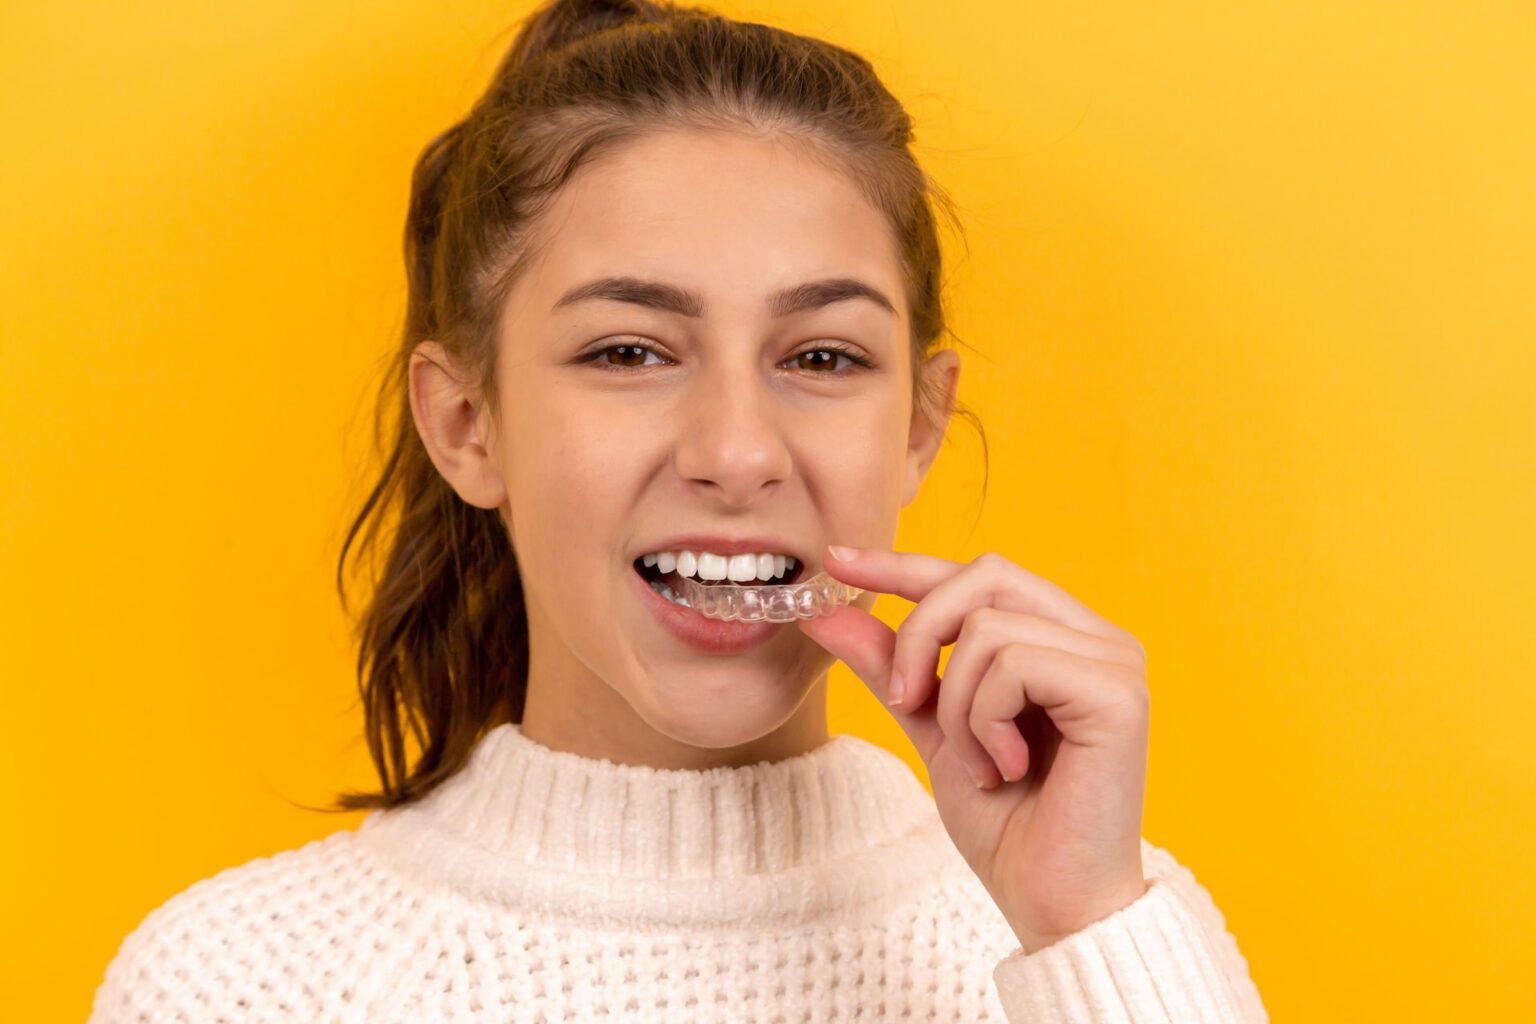 A woman in a white sweater against a yellow background, holding an aligner near her mouth and smiling, showcasing the quality work of an affordable Dallas dentist.